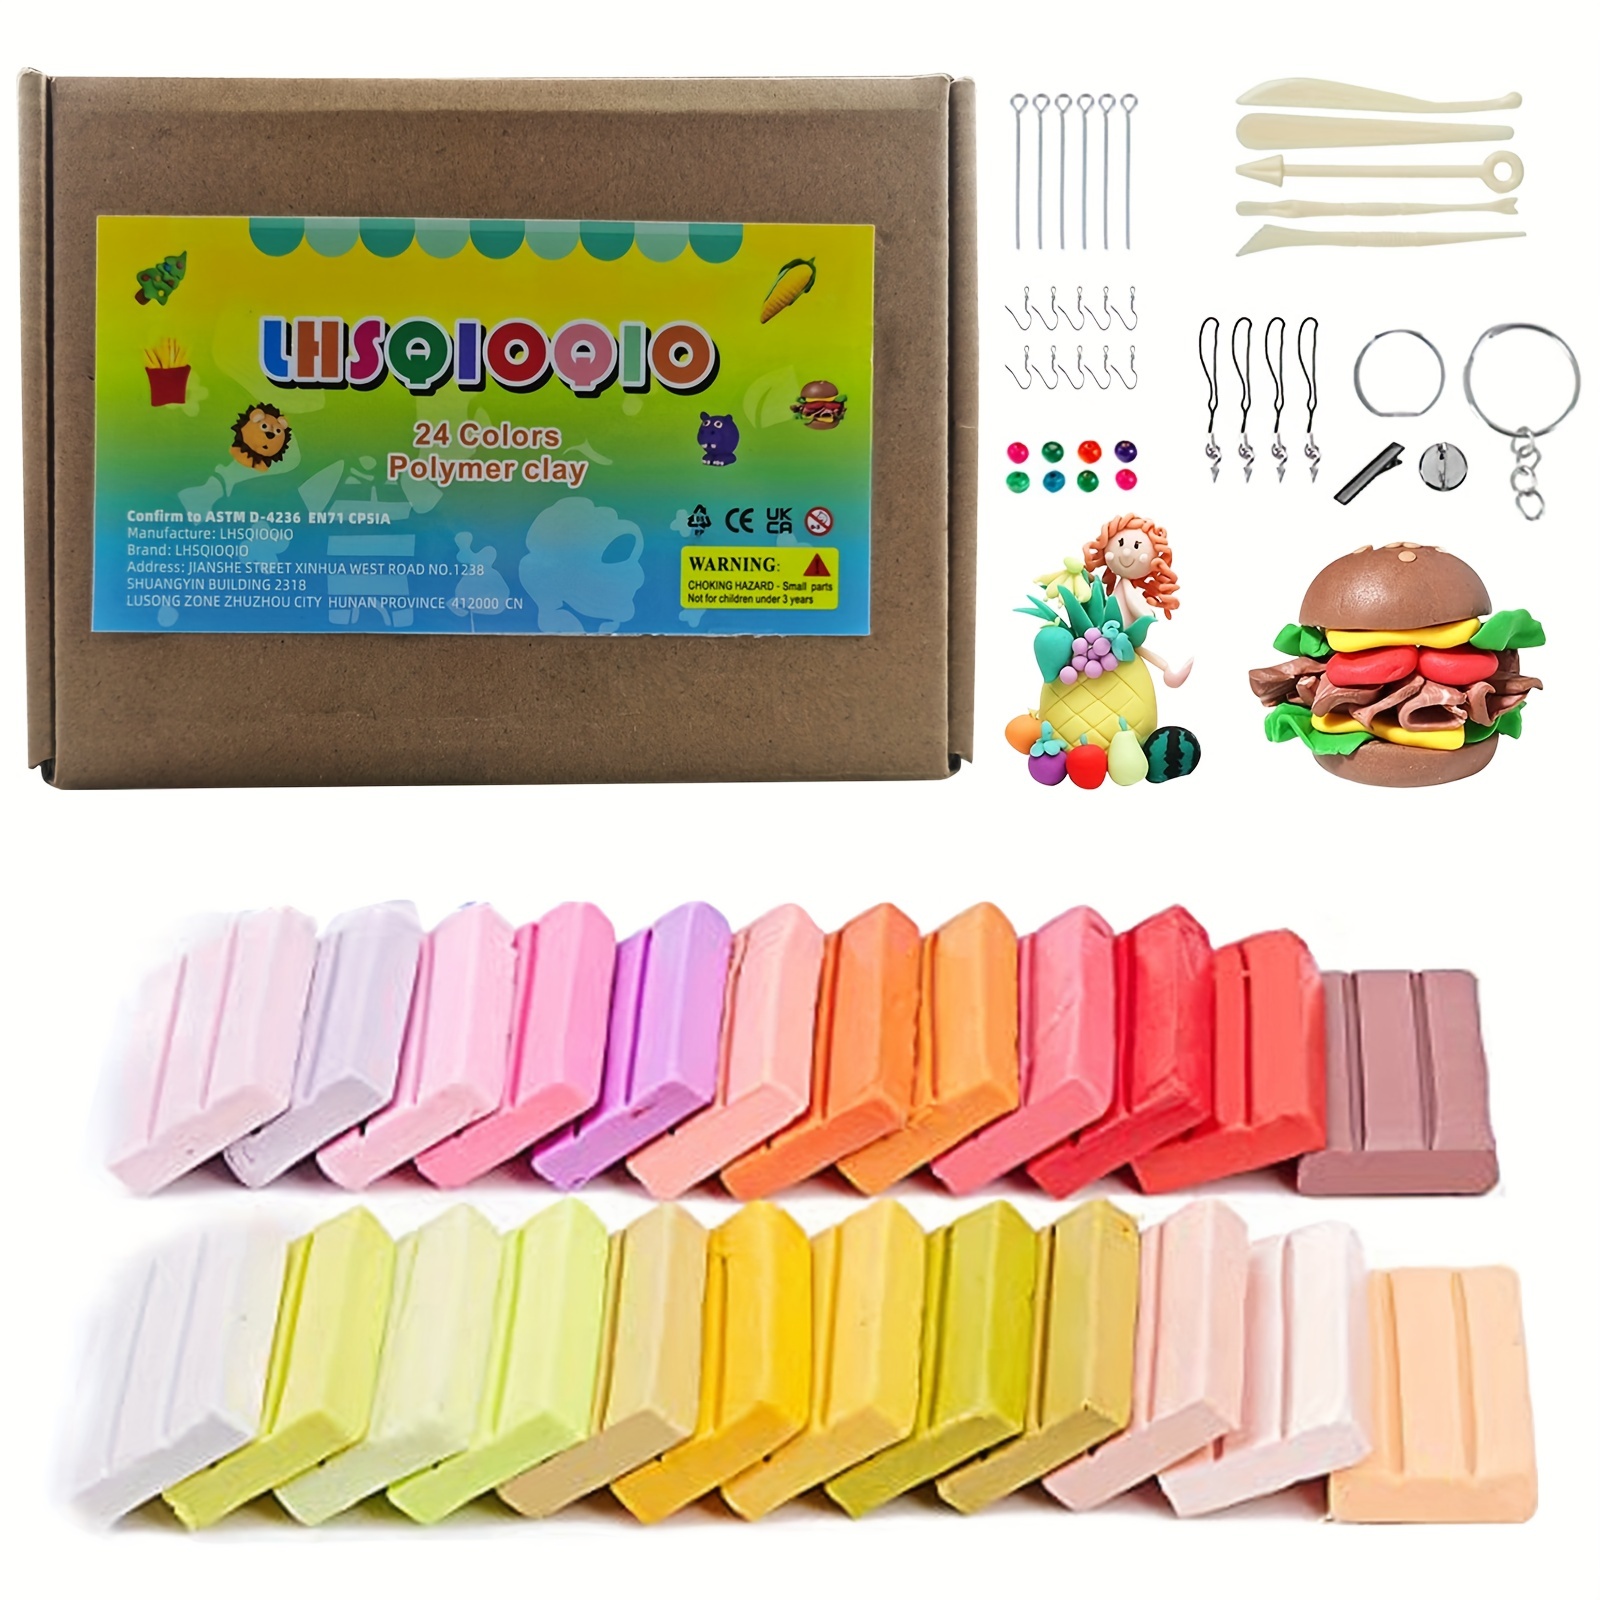 24 Colors Polymer Molding Clay Set Oven Baking Kit With Sculpting Tools  Accessories Diy Crafts Kids Educational Toys Gift